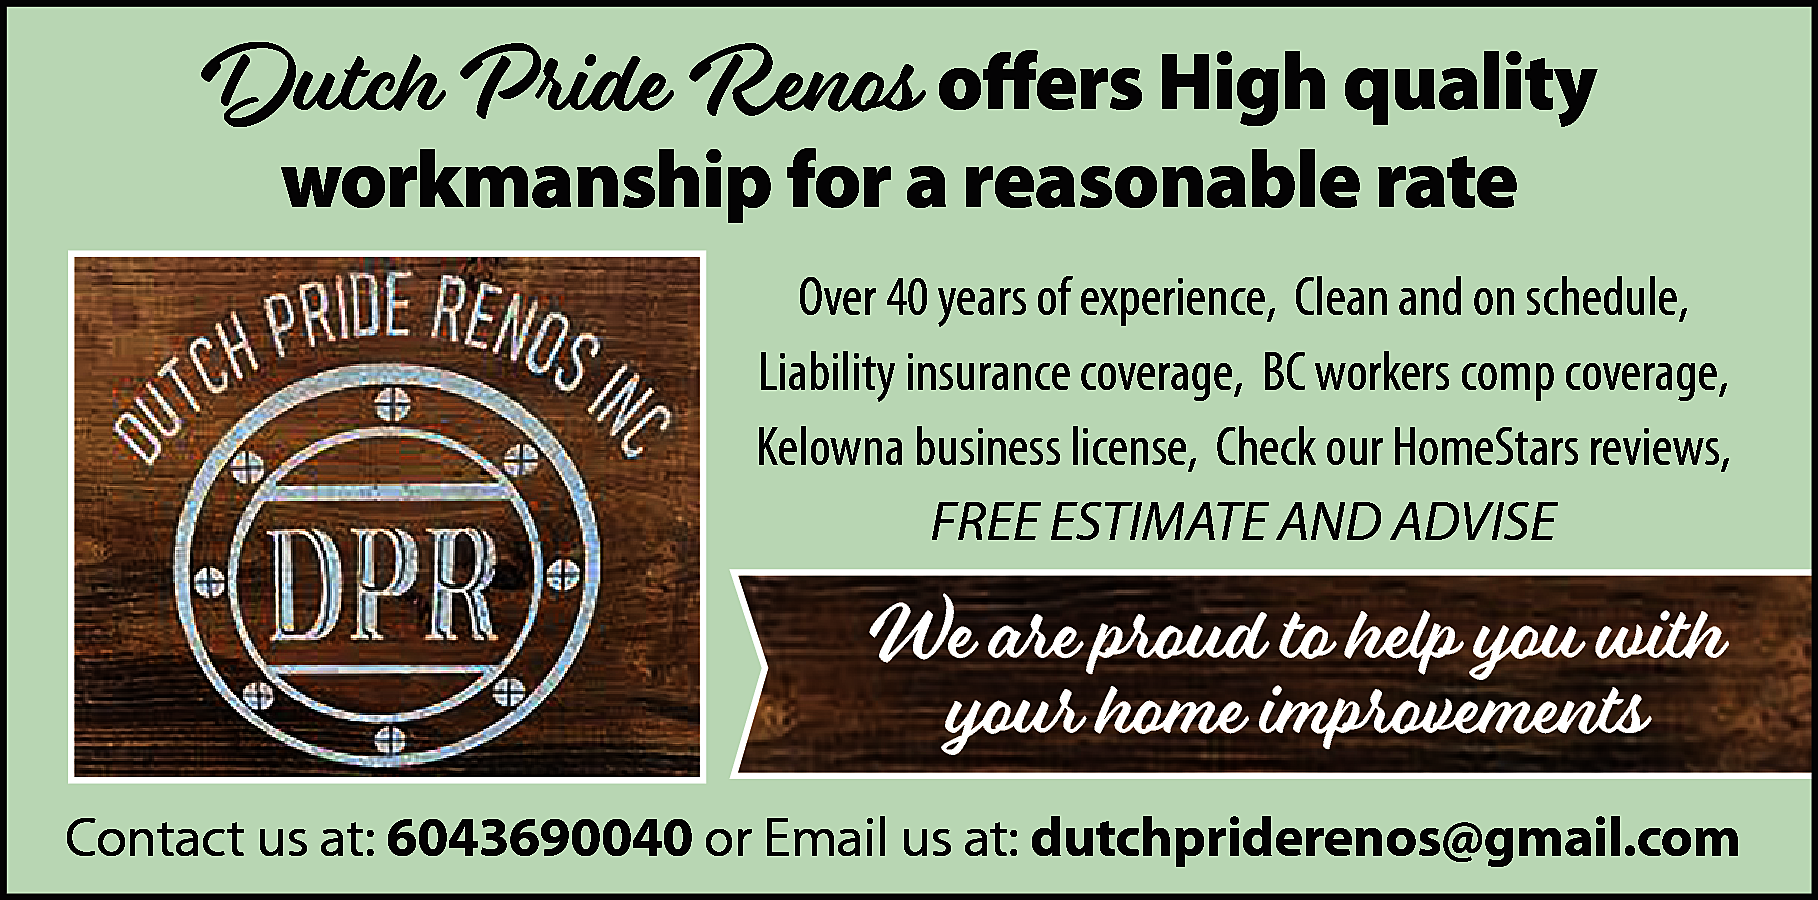 Dutch Pride Renos offers High  Dutch Pride Renos offers High quality  workmanship for a reasonable rate    Over 40 years of experience, Clean and on schedule,  Liability insurance coverage, BC workers comp coverage,  Kelowna business license, Check our HomeStars reviews,  FREE ESTIMATE AND ADVISE    We are proud to help you with  your home improvements  Contact us at: 6043690040 or Email us at: dutchpriderenos@gmail.com    